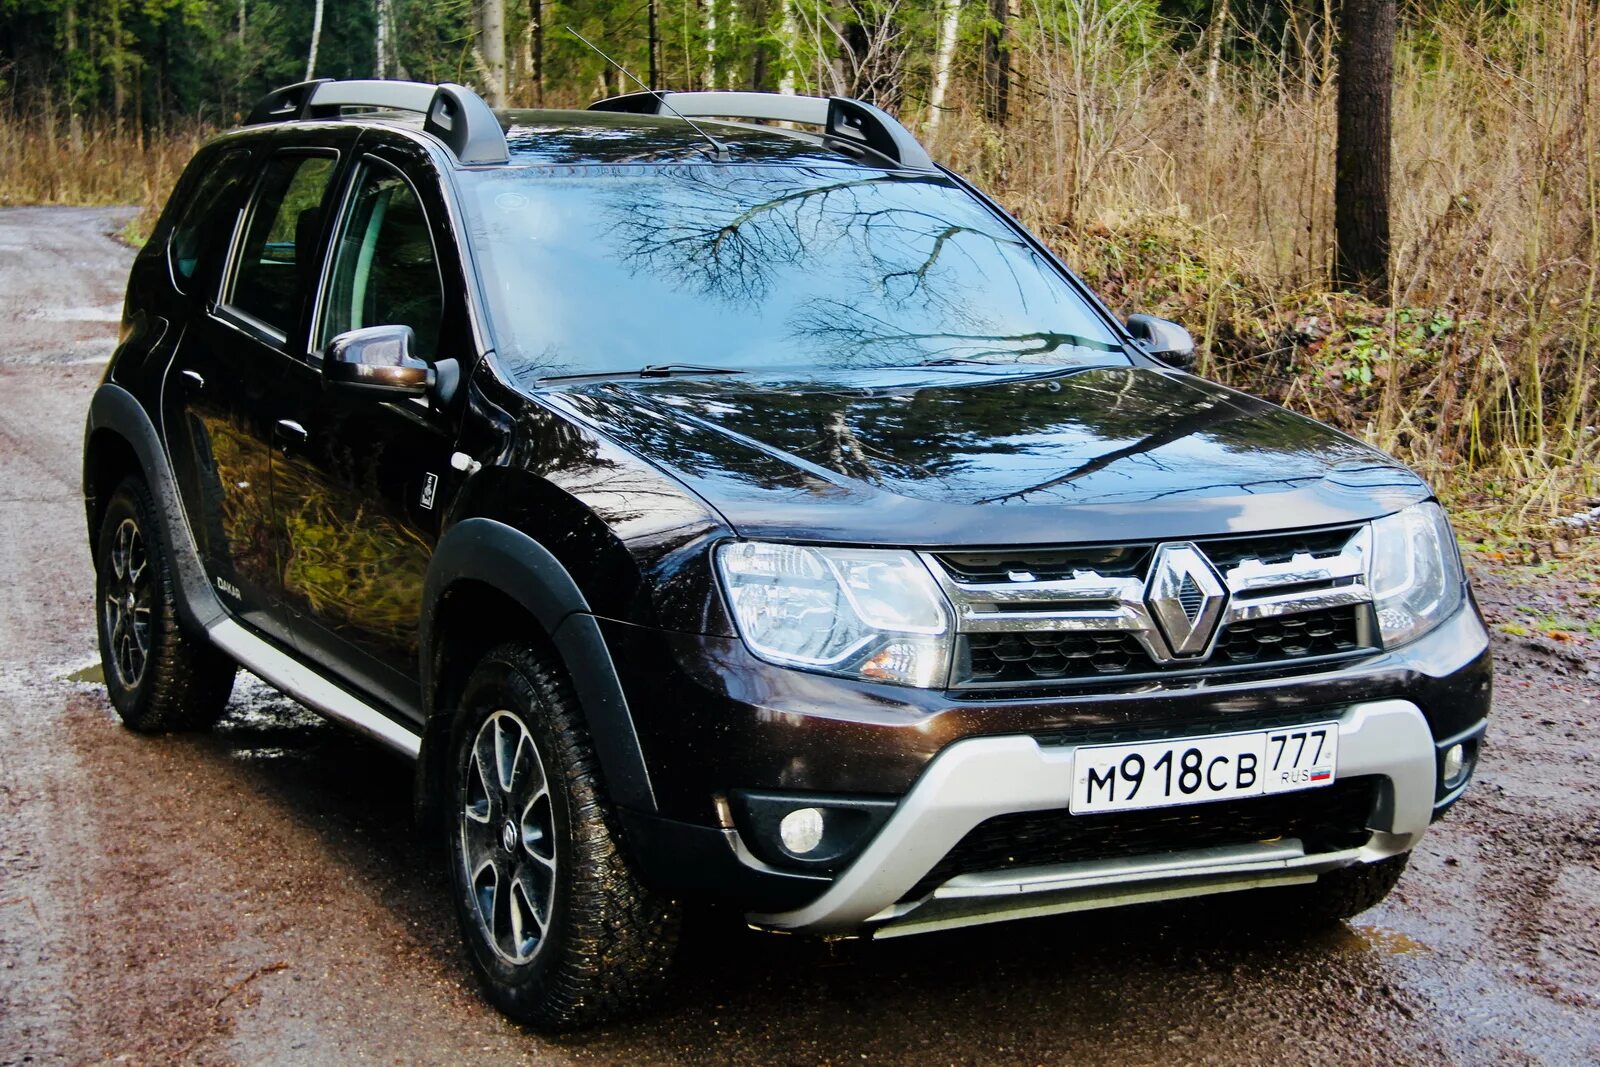 Renault Duster. Renault Duster 2017. Рено Дастер Дакар. Рено Дастер 2016 20. Купить рено дастер 2015 год